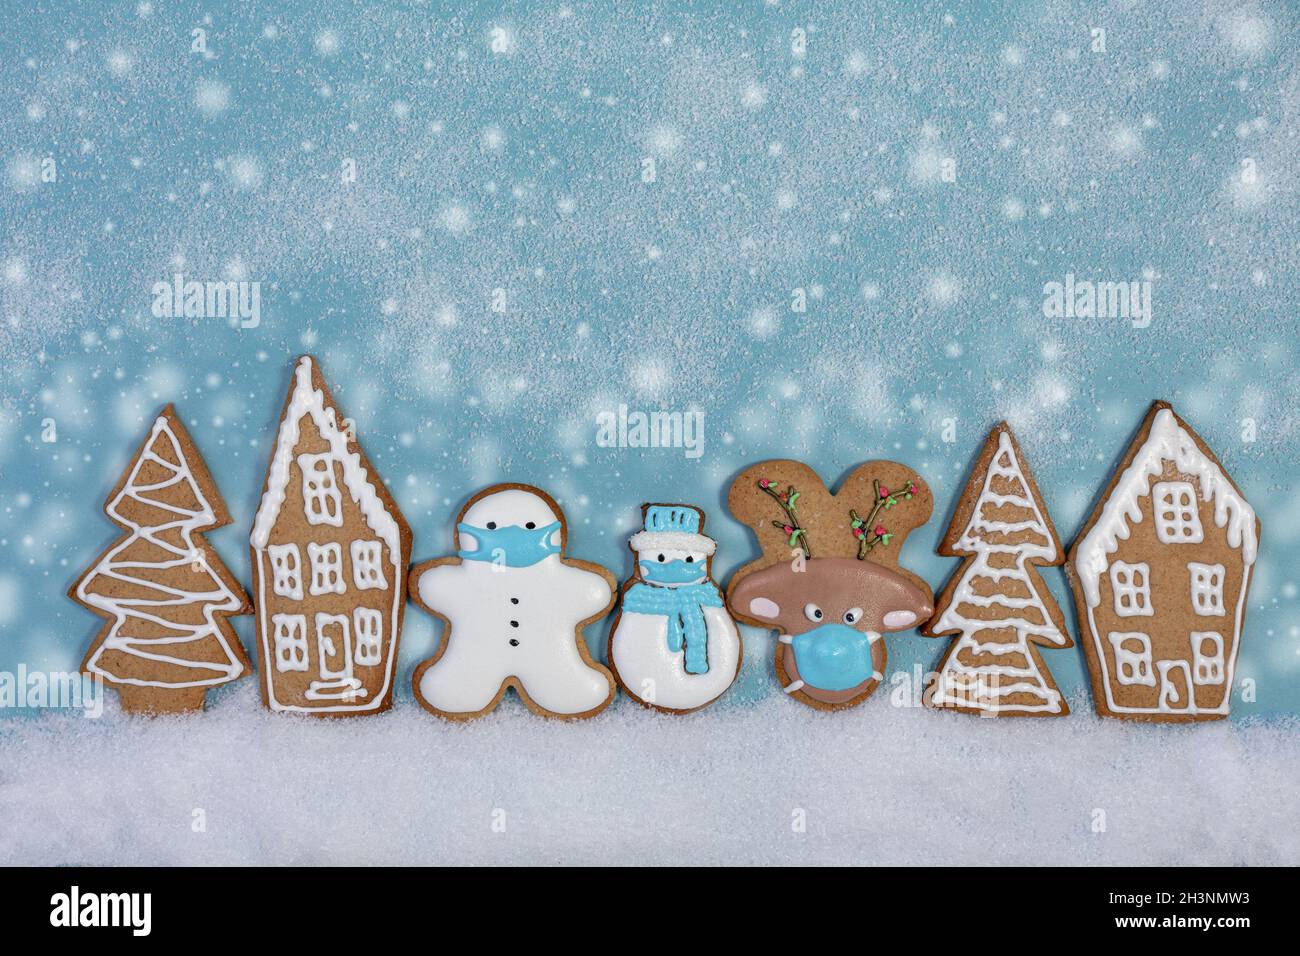 Christmas card with ginger cookies. Stock Photo